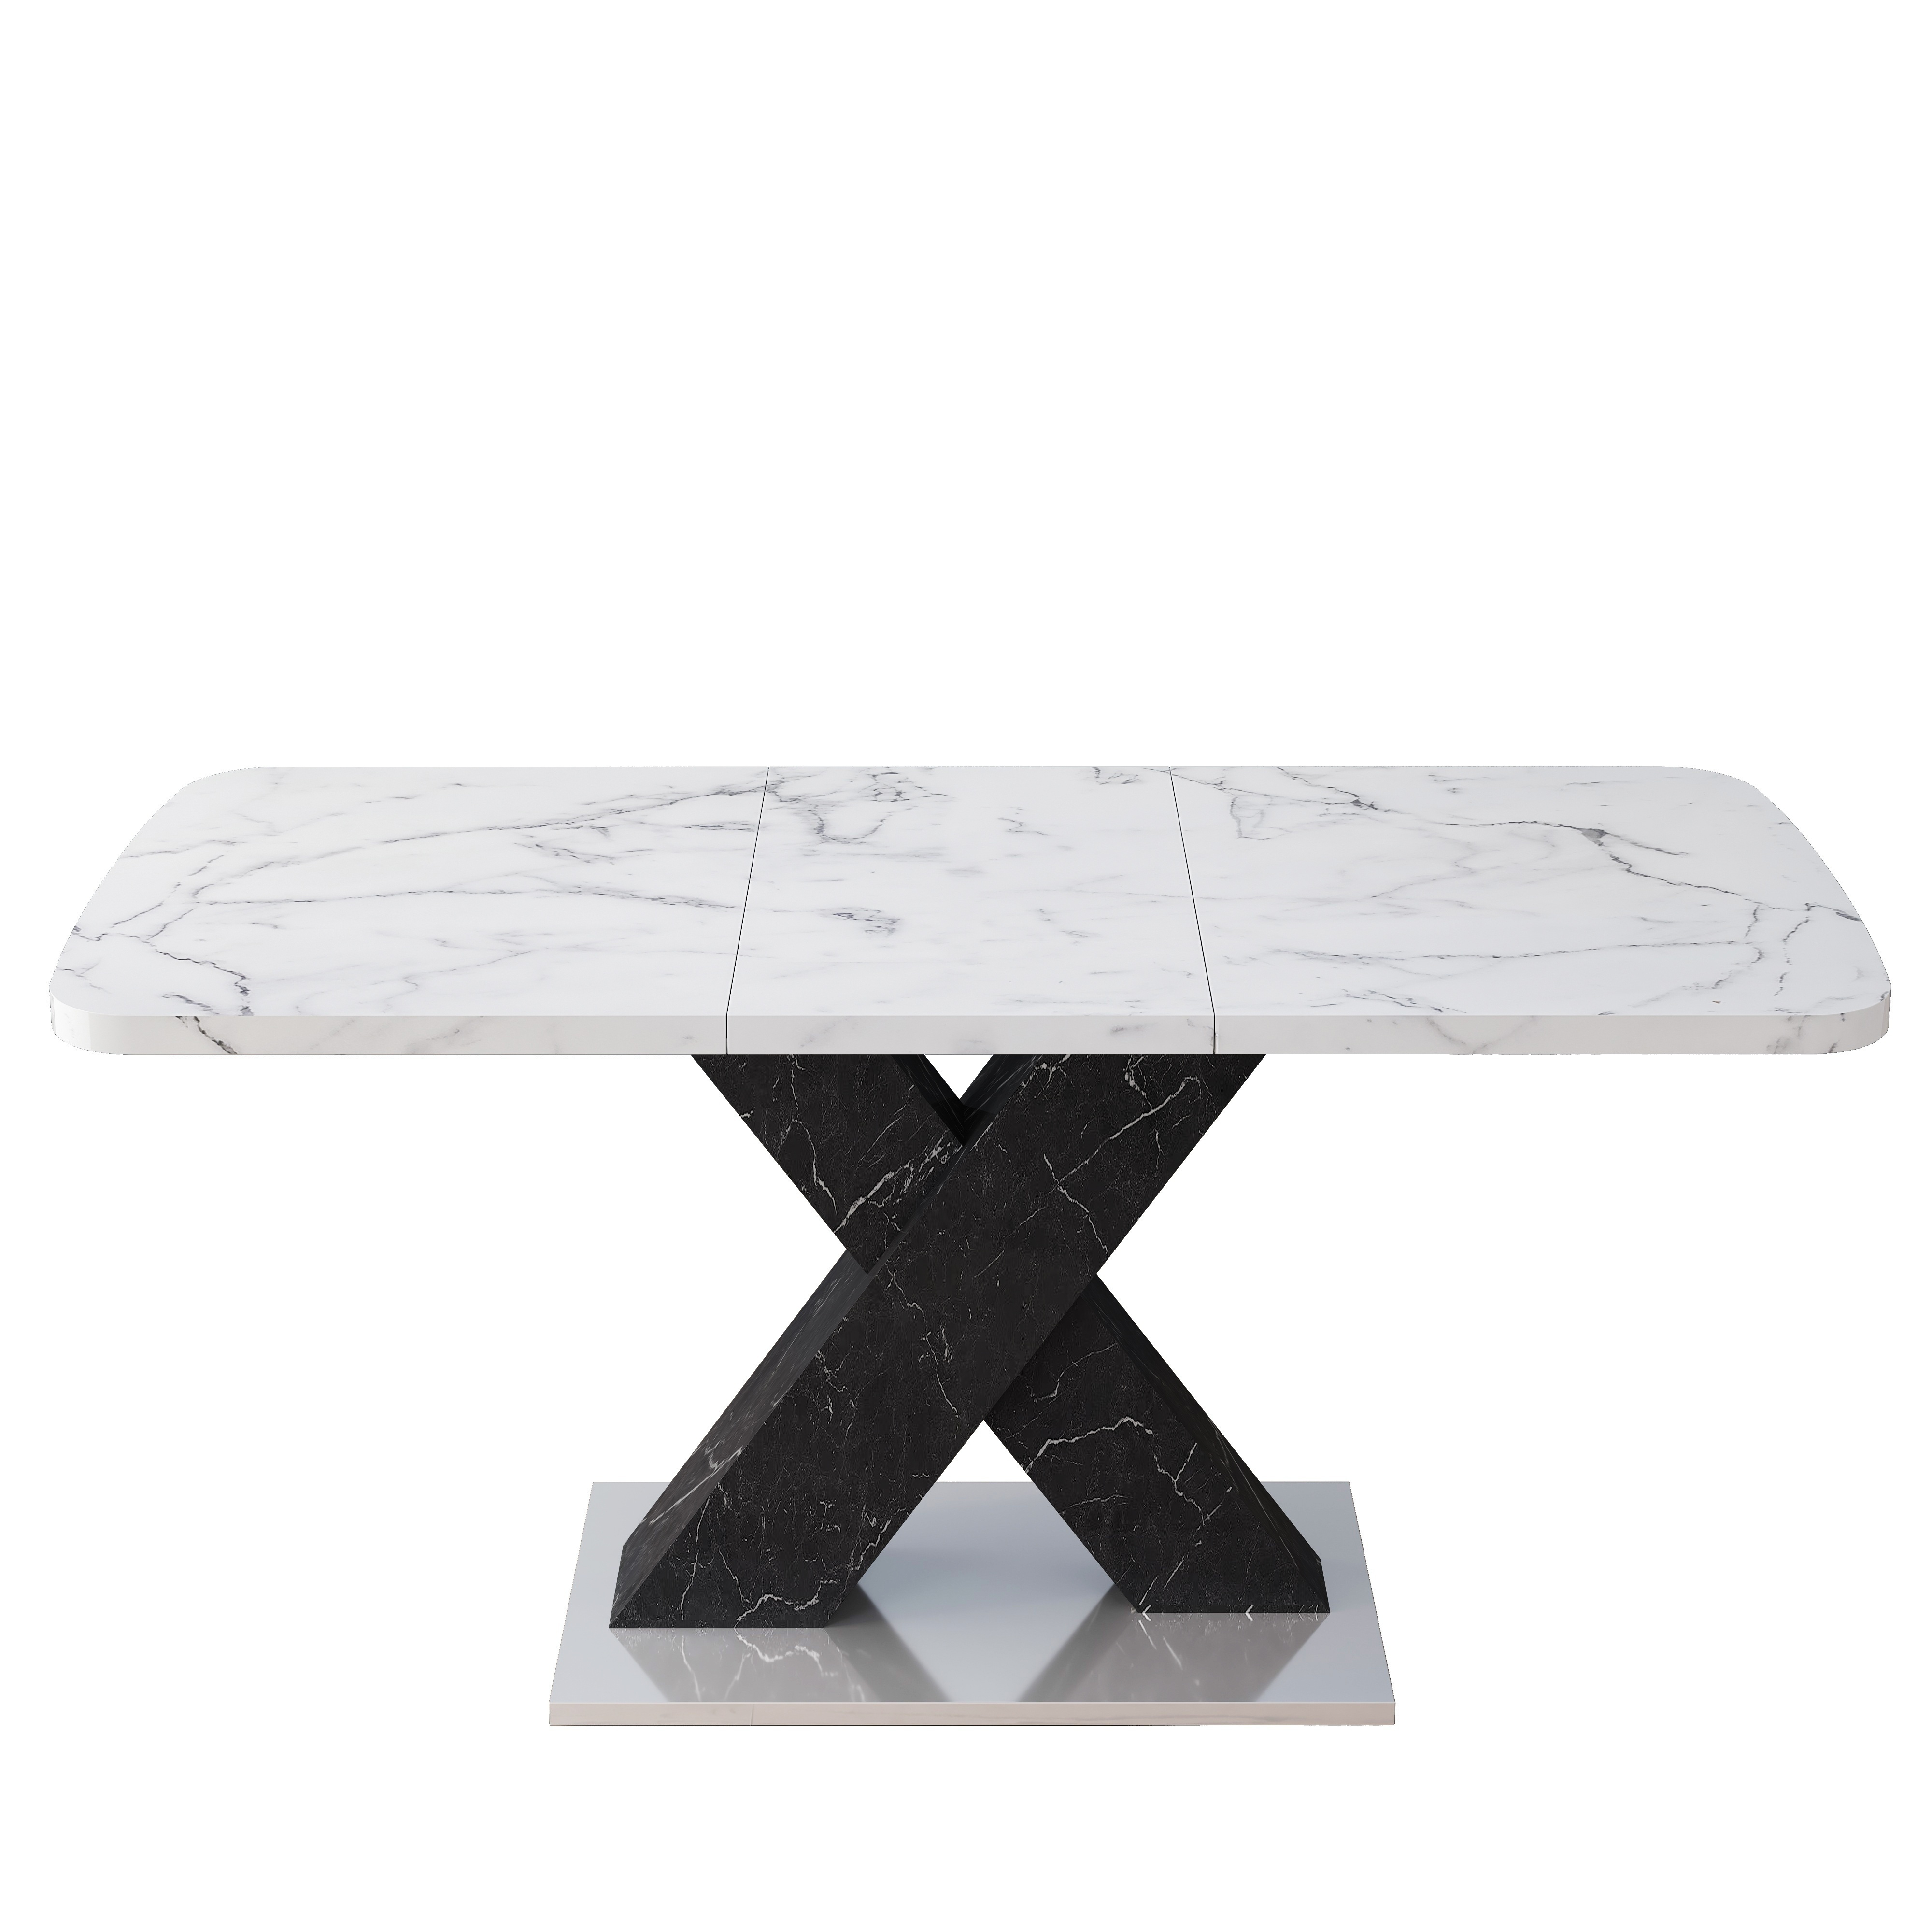 

Modern Square Dining Table, Stretchable, White Marble Table Top+mdf Black X-shape Table Leg With Metal Base